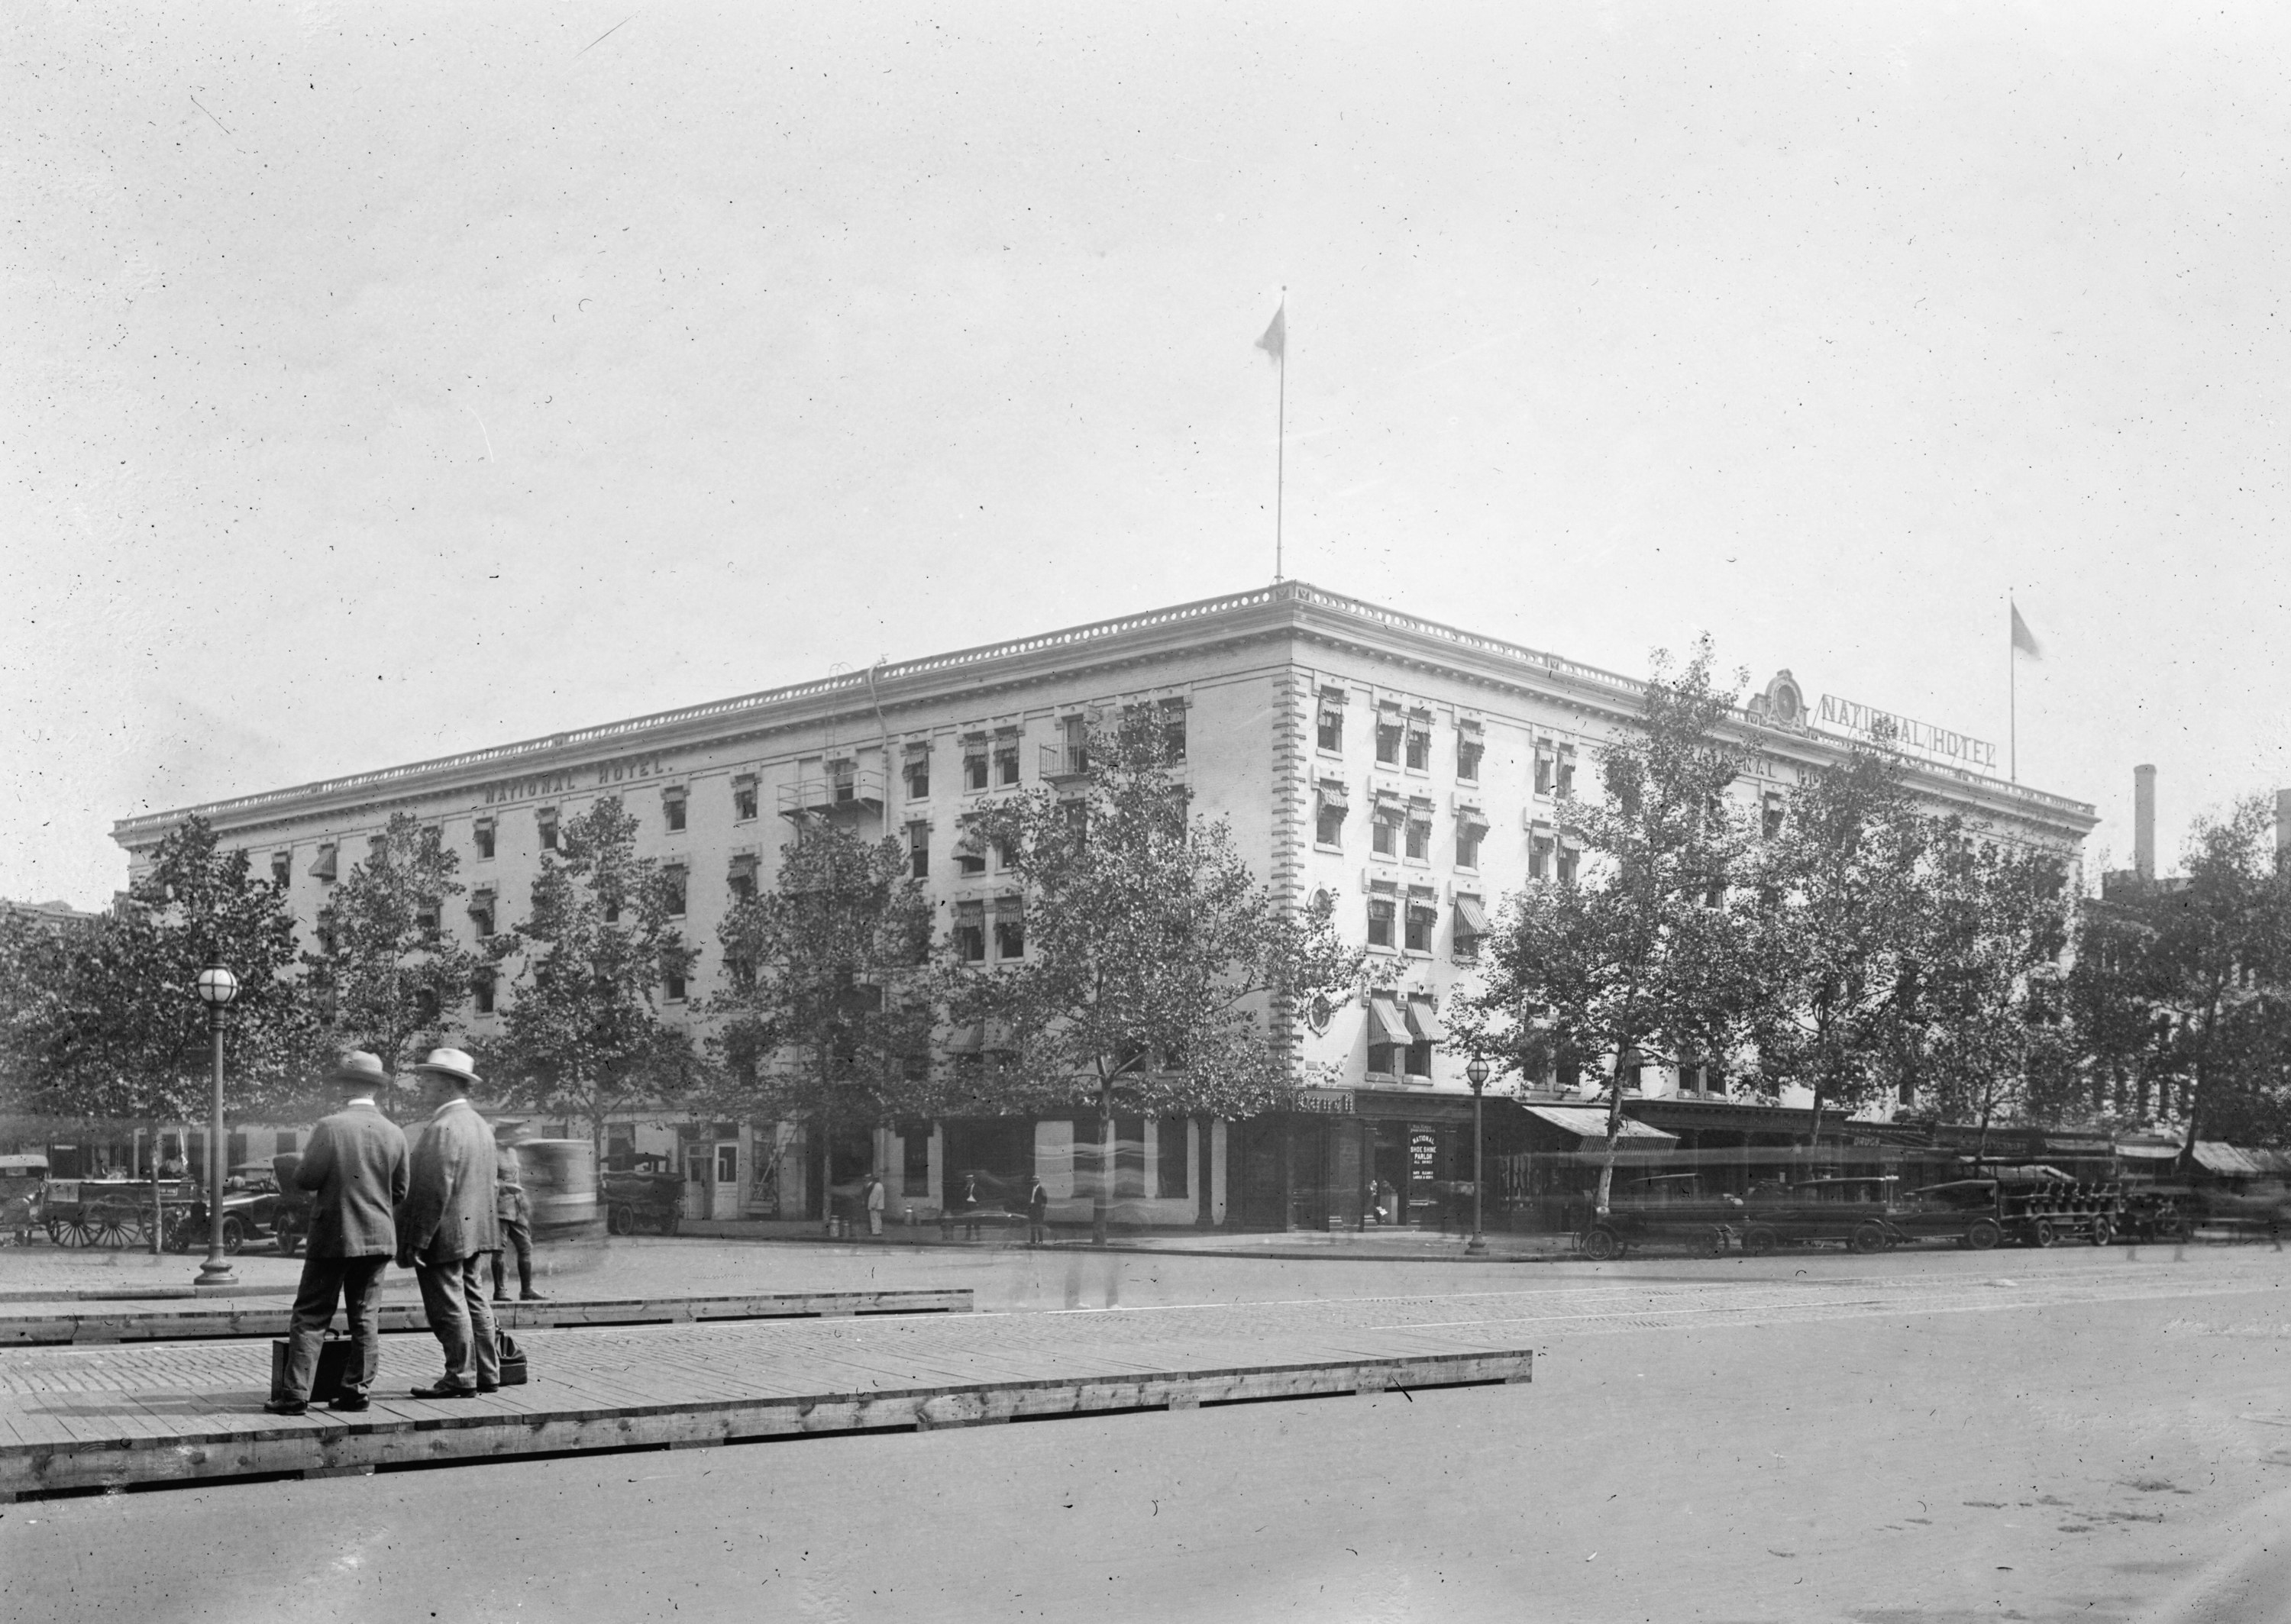 National Hotel between 1909 and 1920